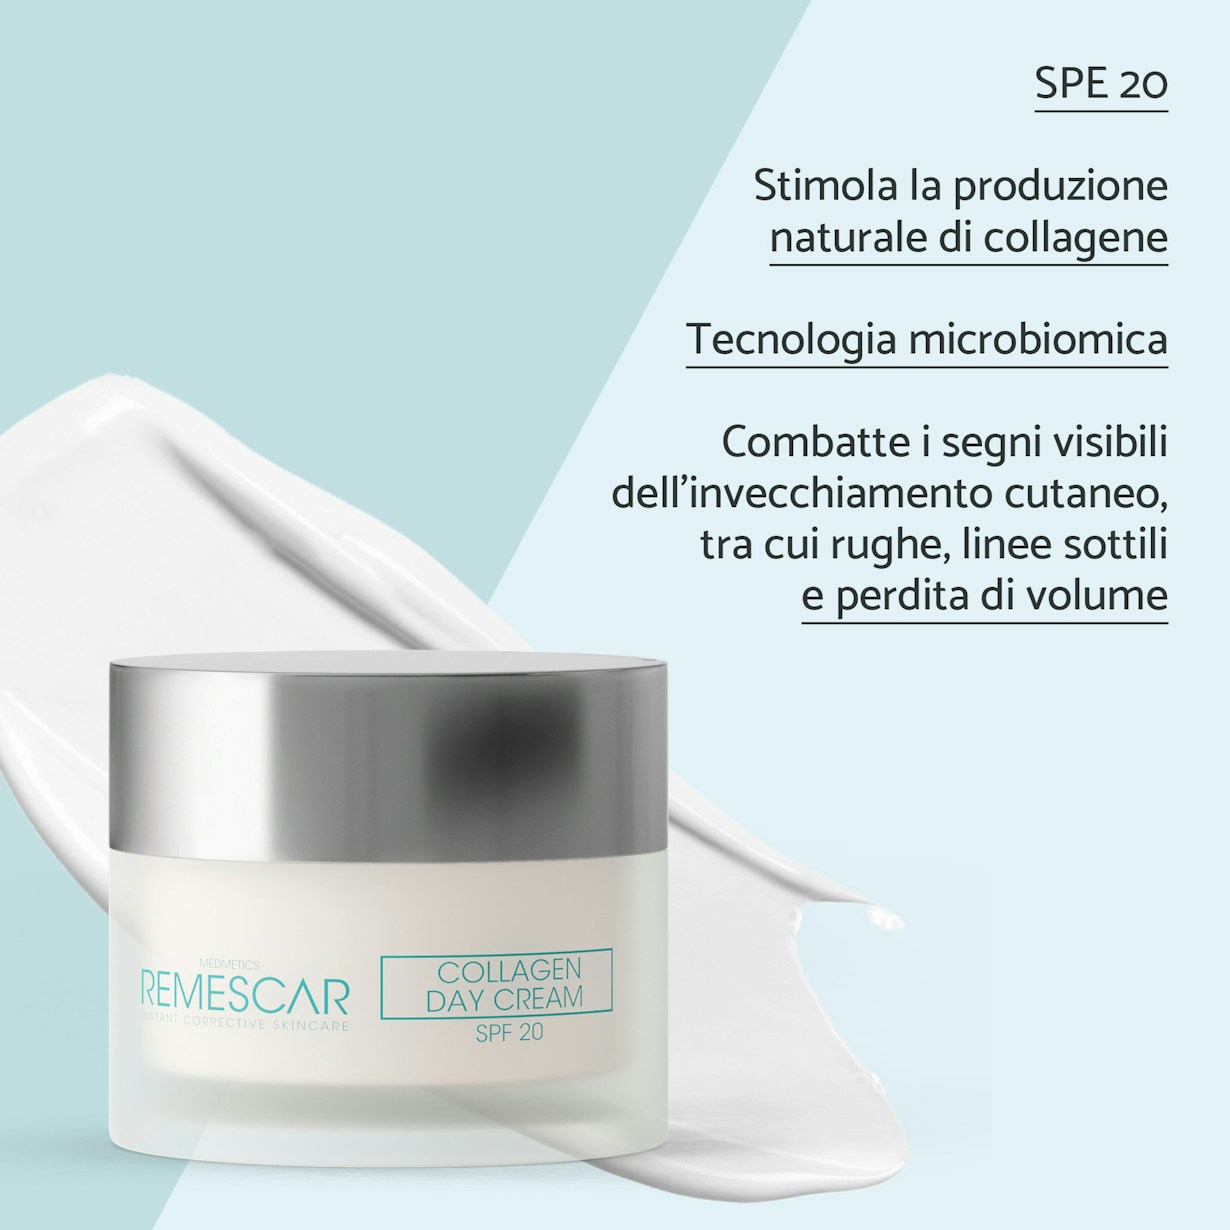 Remescar pdp pictures website and amazon 2000x2000px collagen day cream IT8